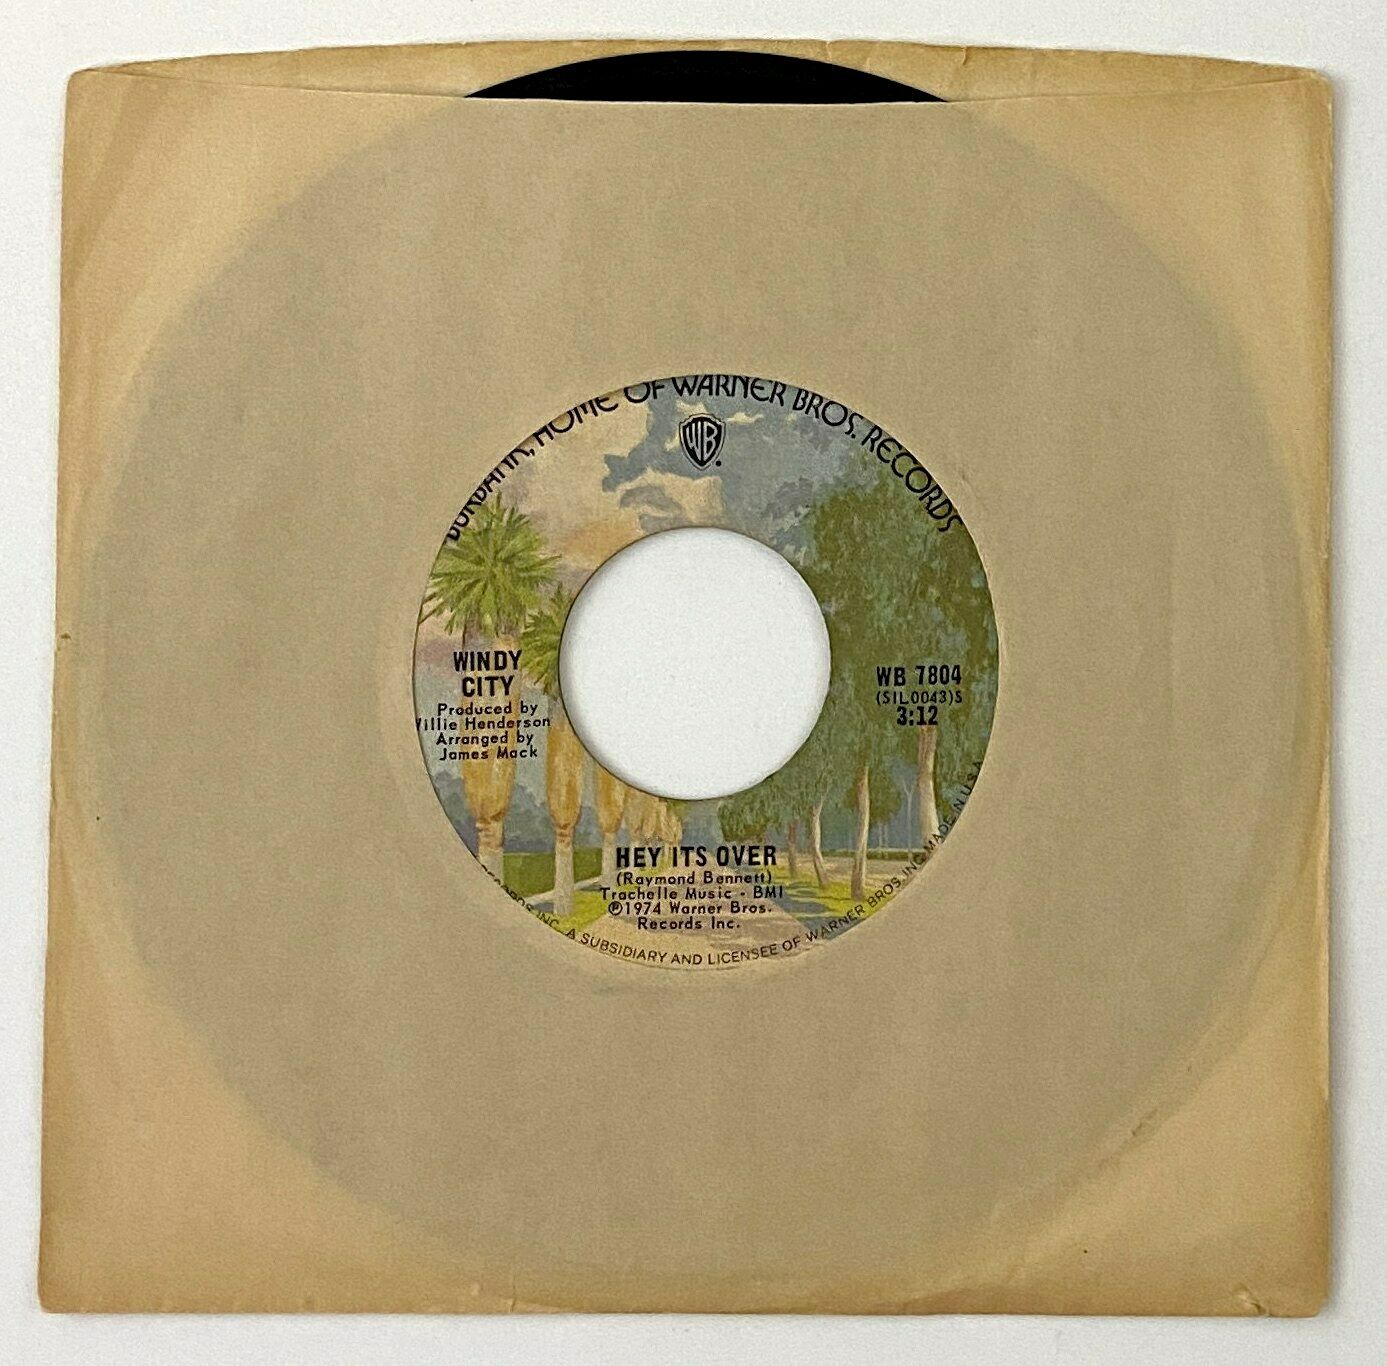 popsike.com - Windy City "Hey It's Over" 70s Soul 45 Warner Bros mp3 -  auction details